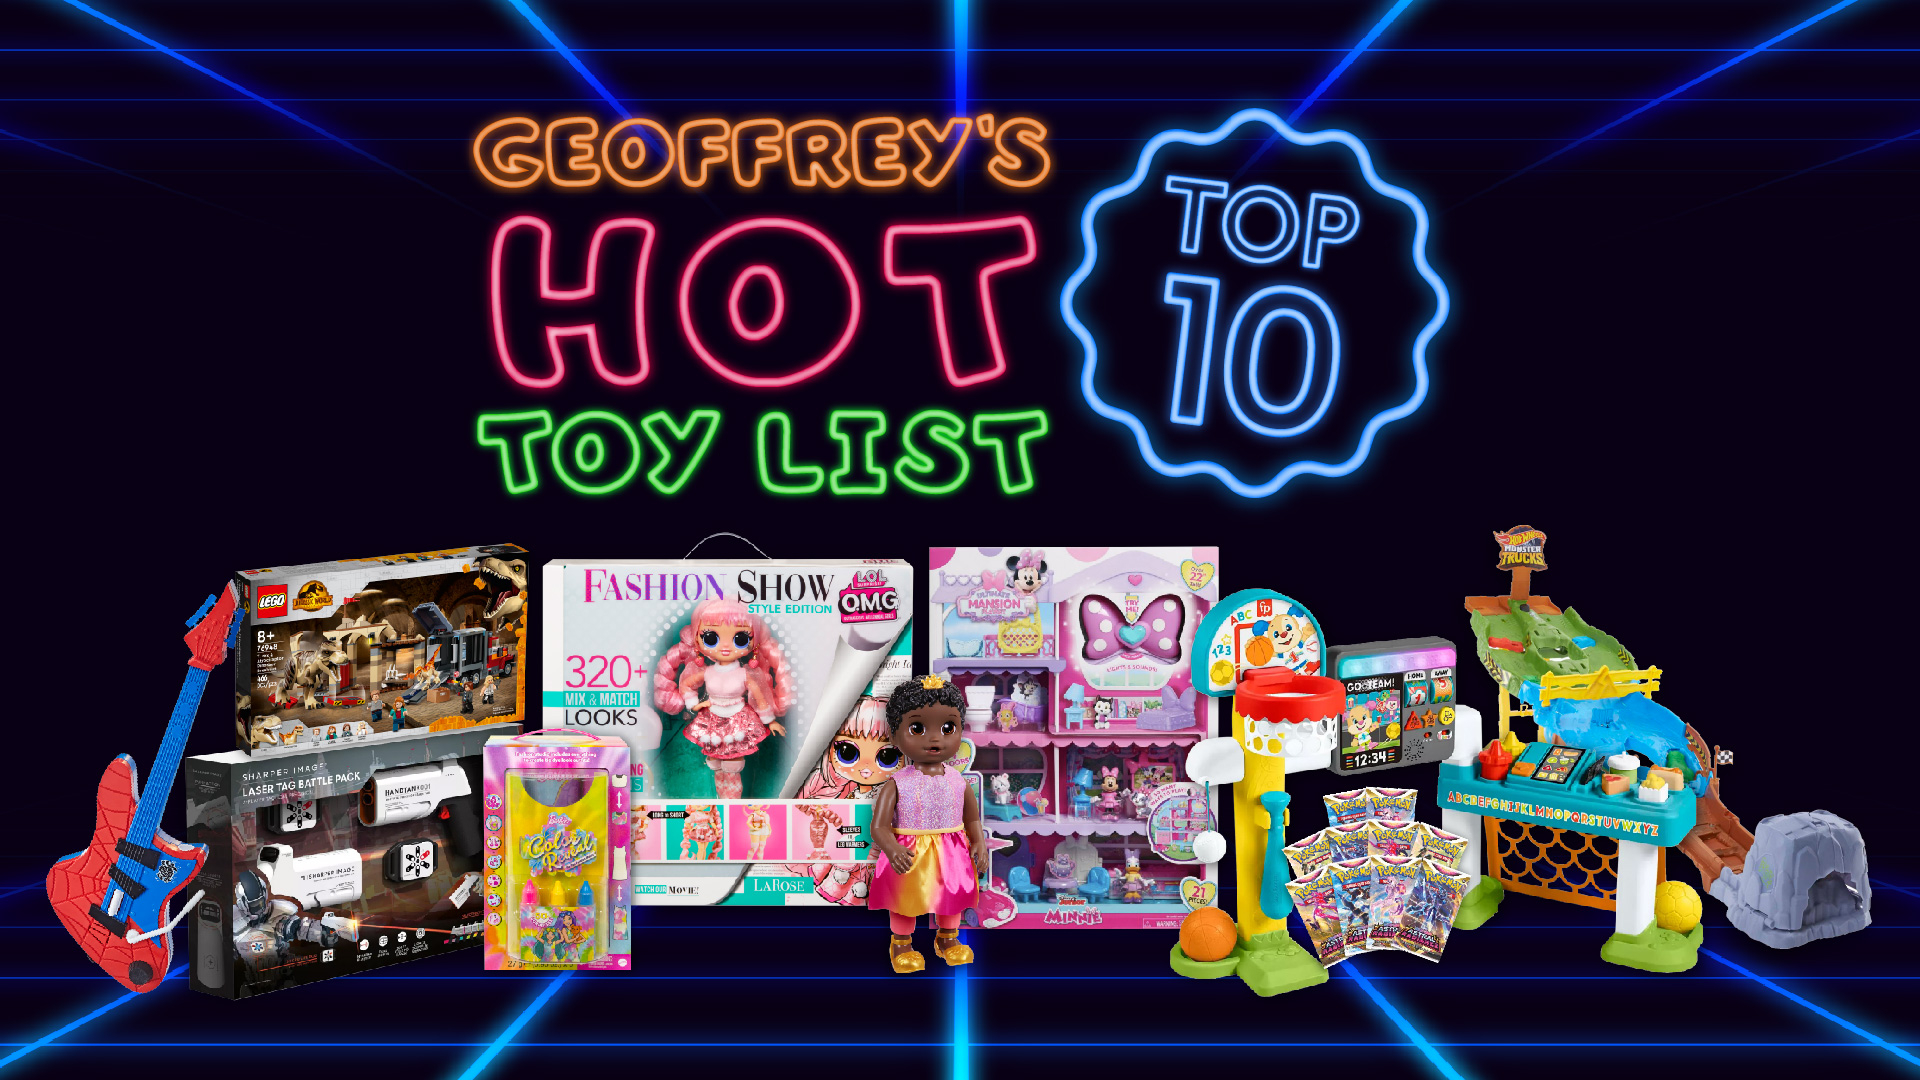 Macy's and Toys“R”Us Reveal 100 Hot Toy List for the 2022 Holiday Season | Business Wire